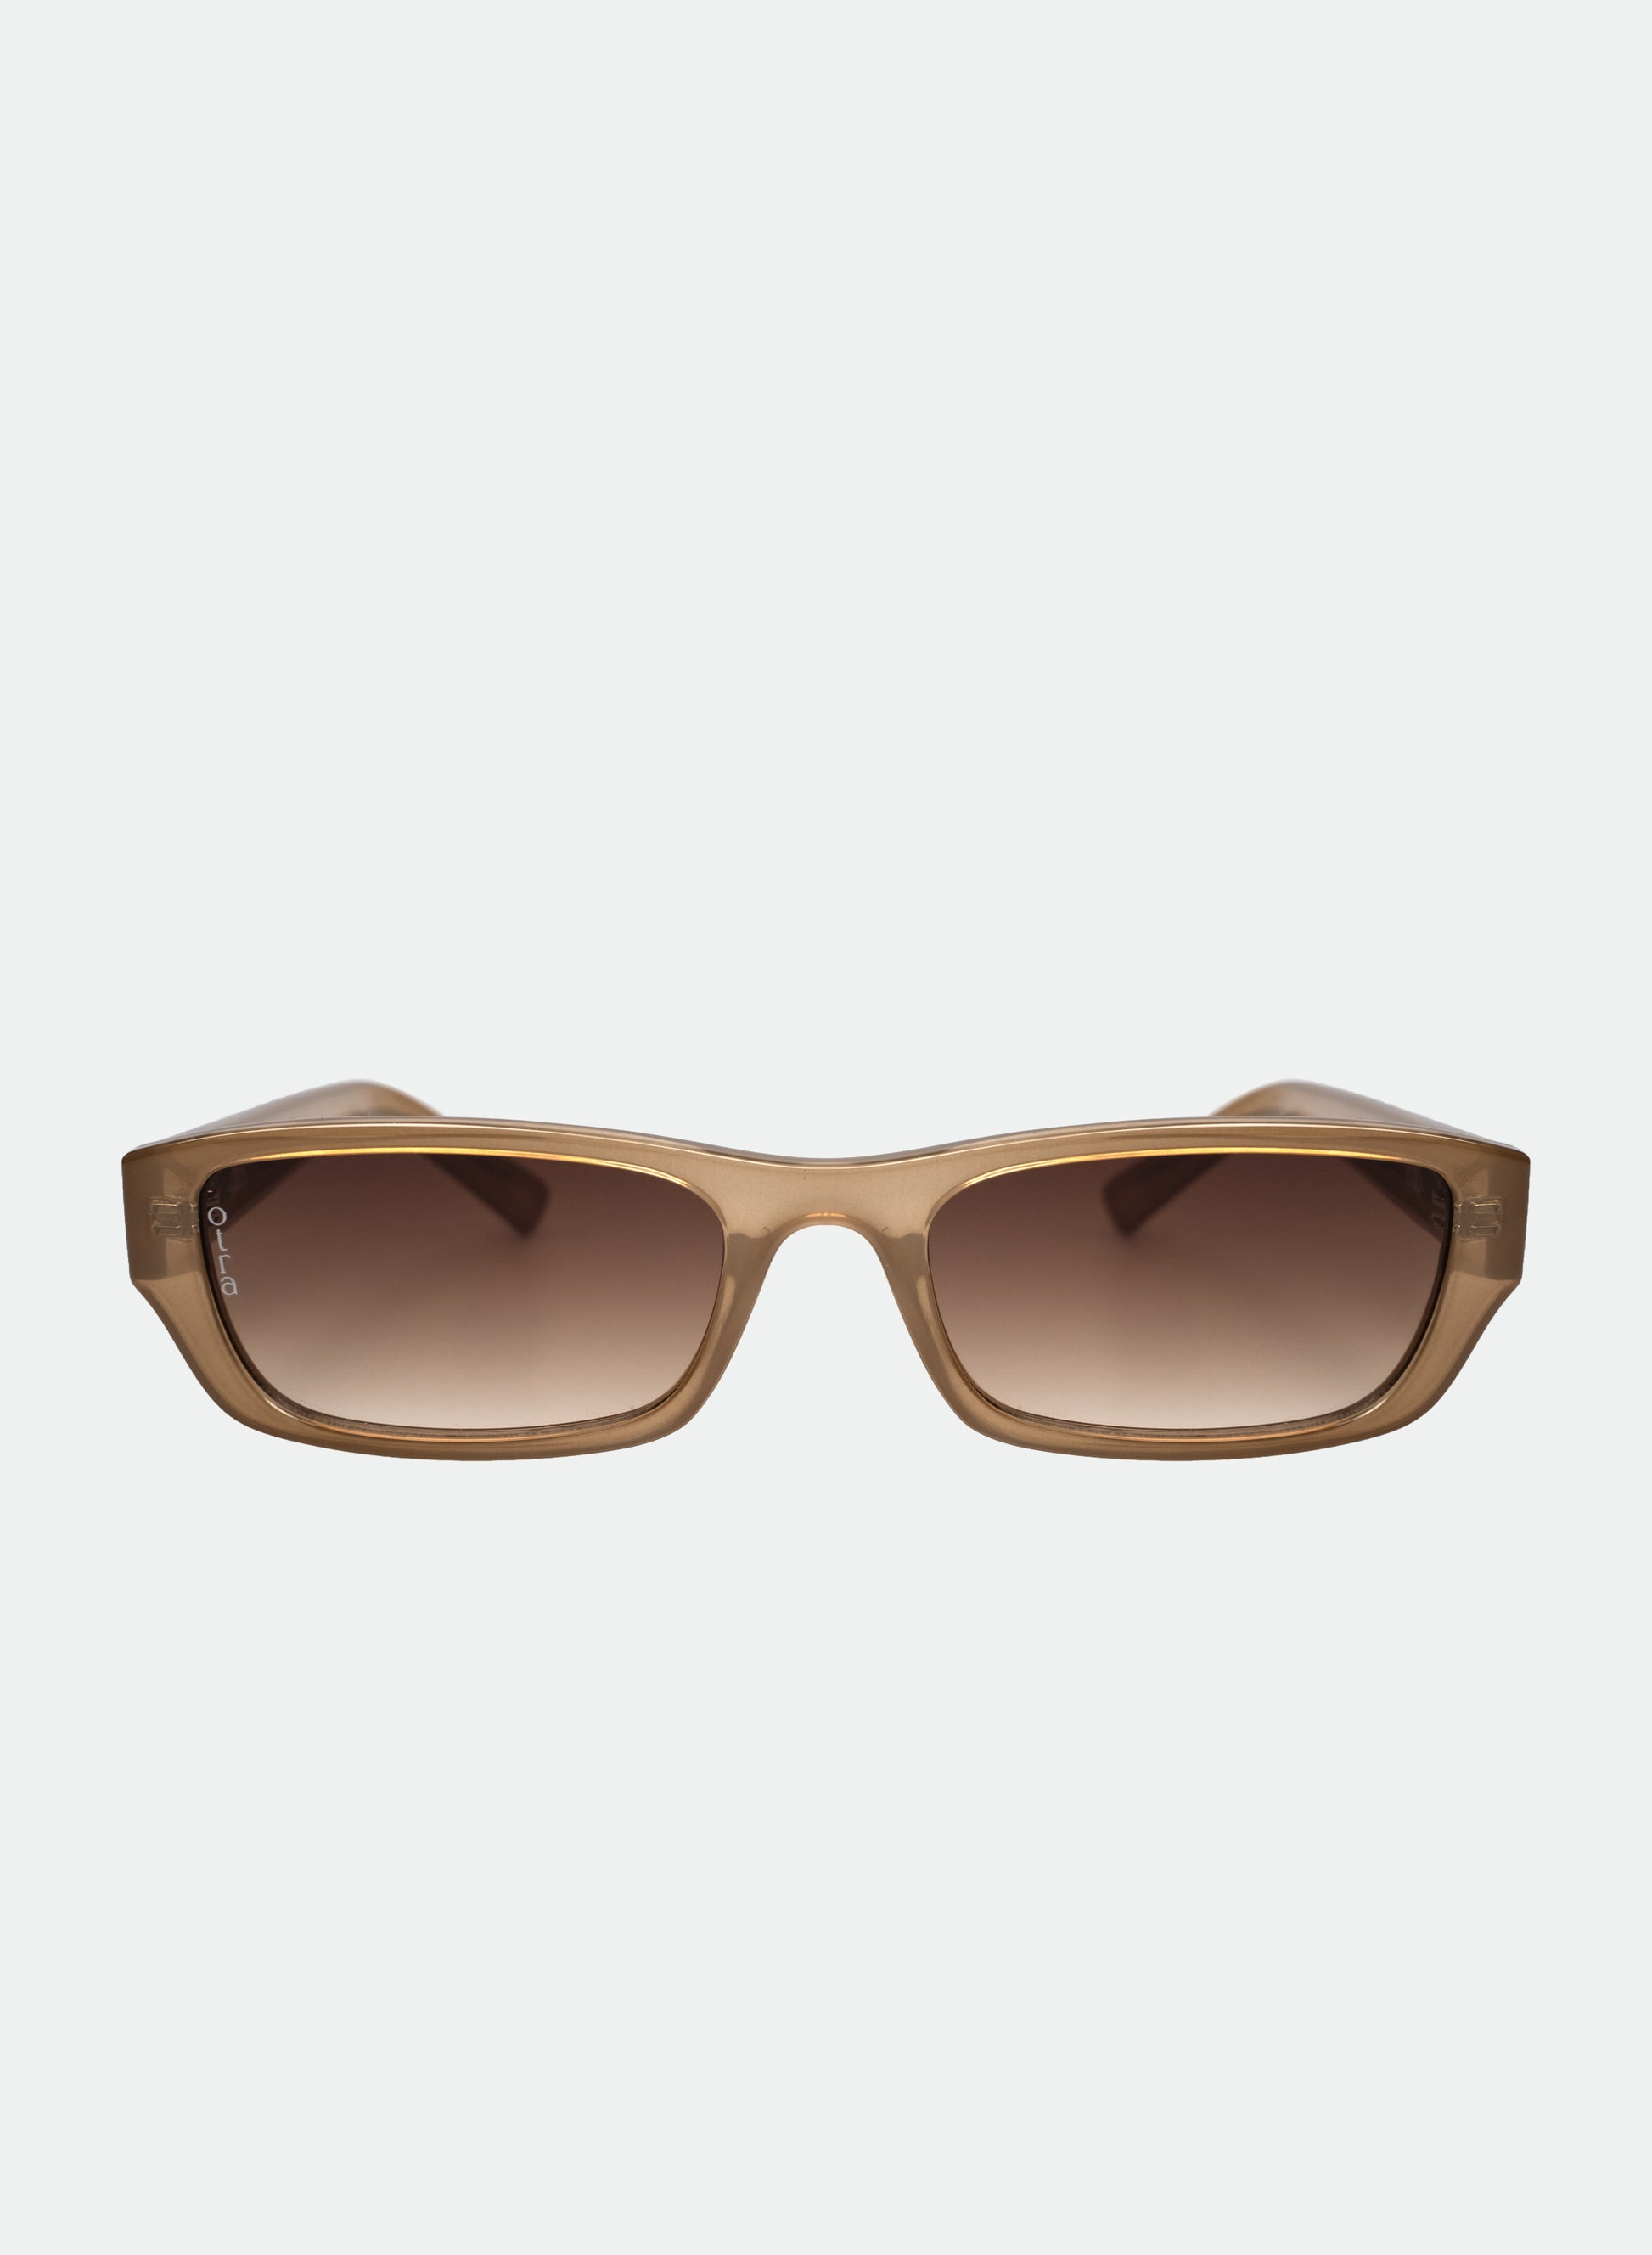 Mabel brown sunglasses front view